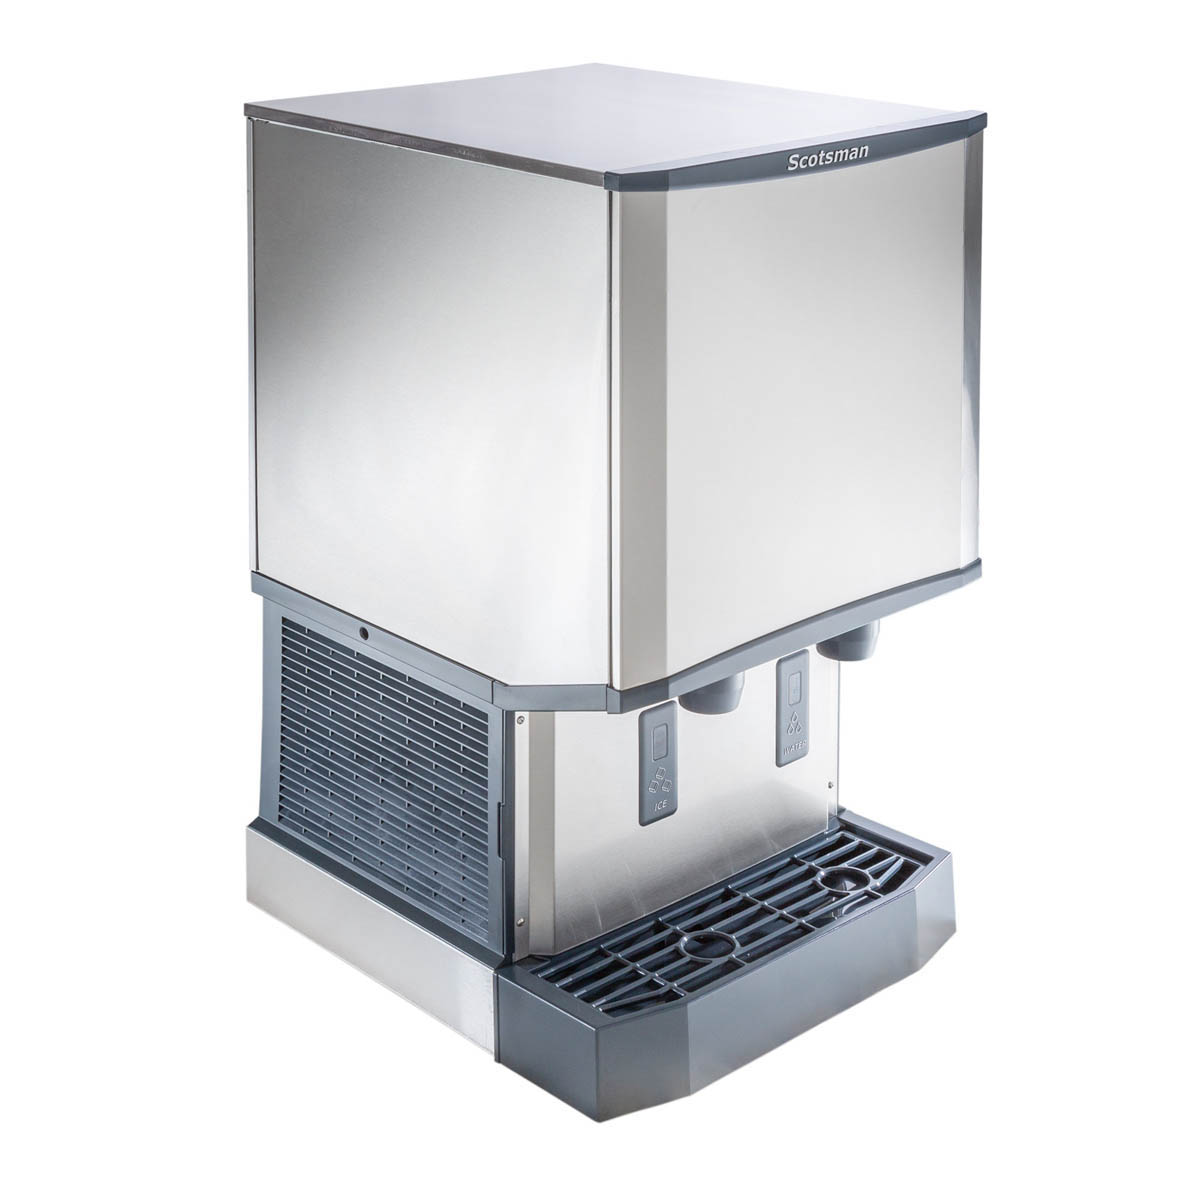 With Scotsman HID540A-1 Easy to Serve Ice For Your Customers, Chef's Deal